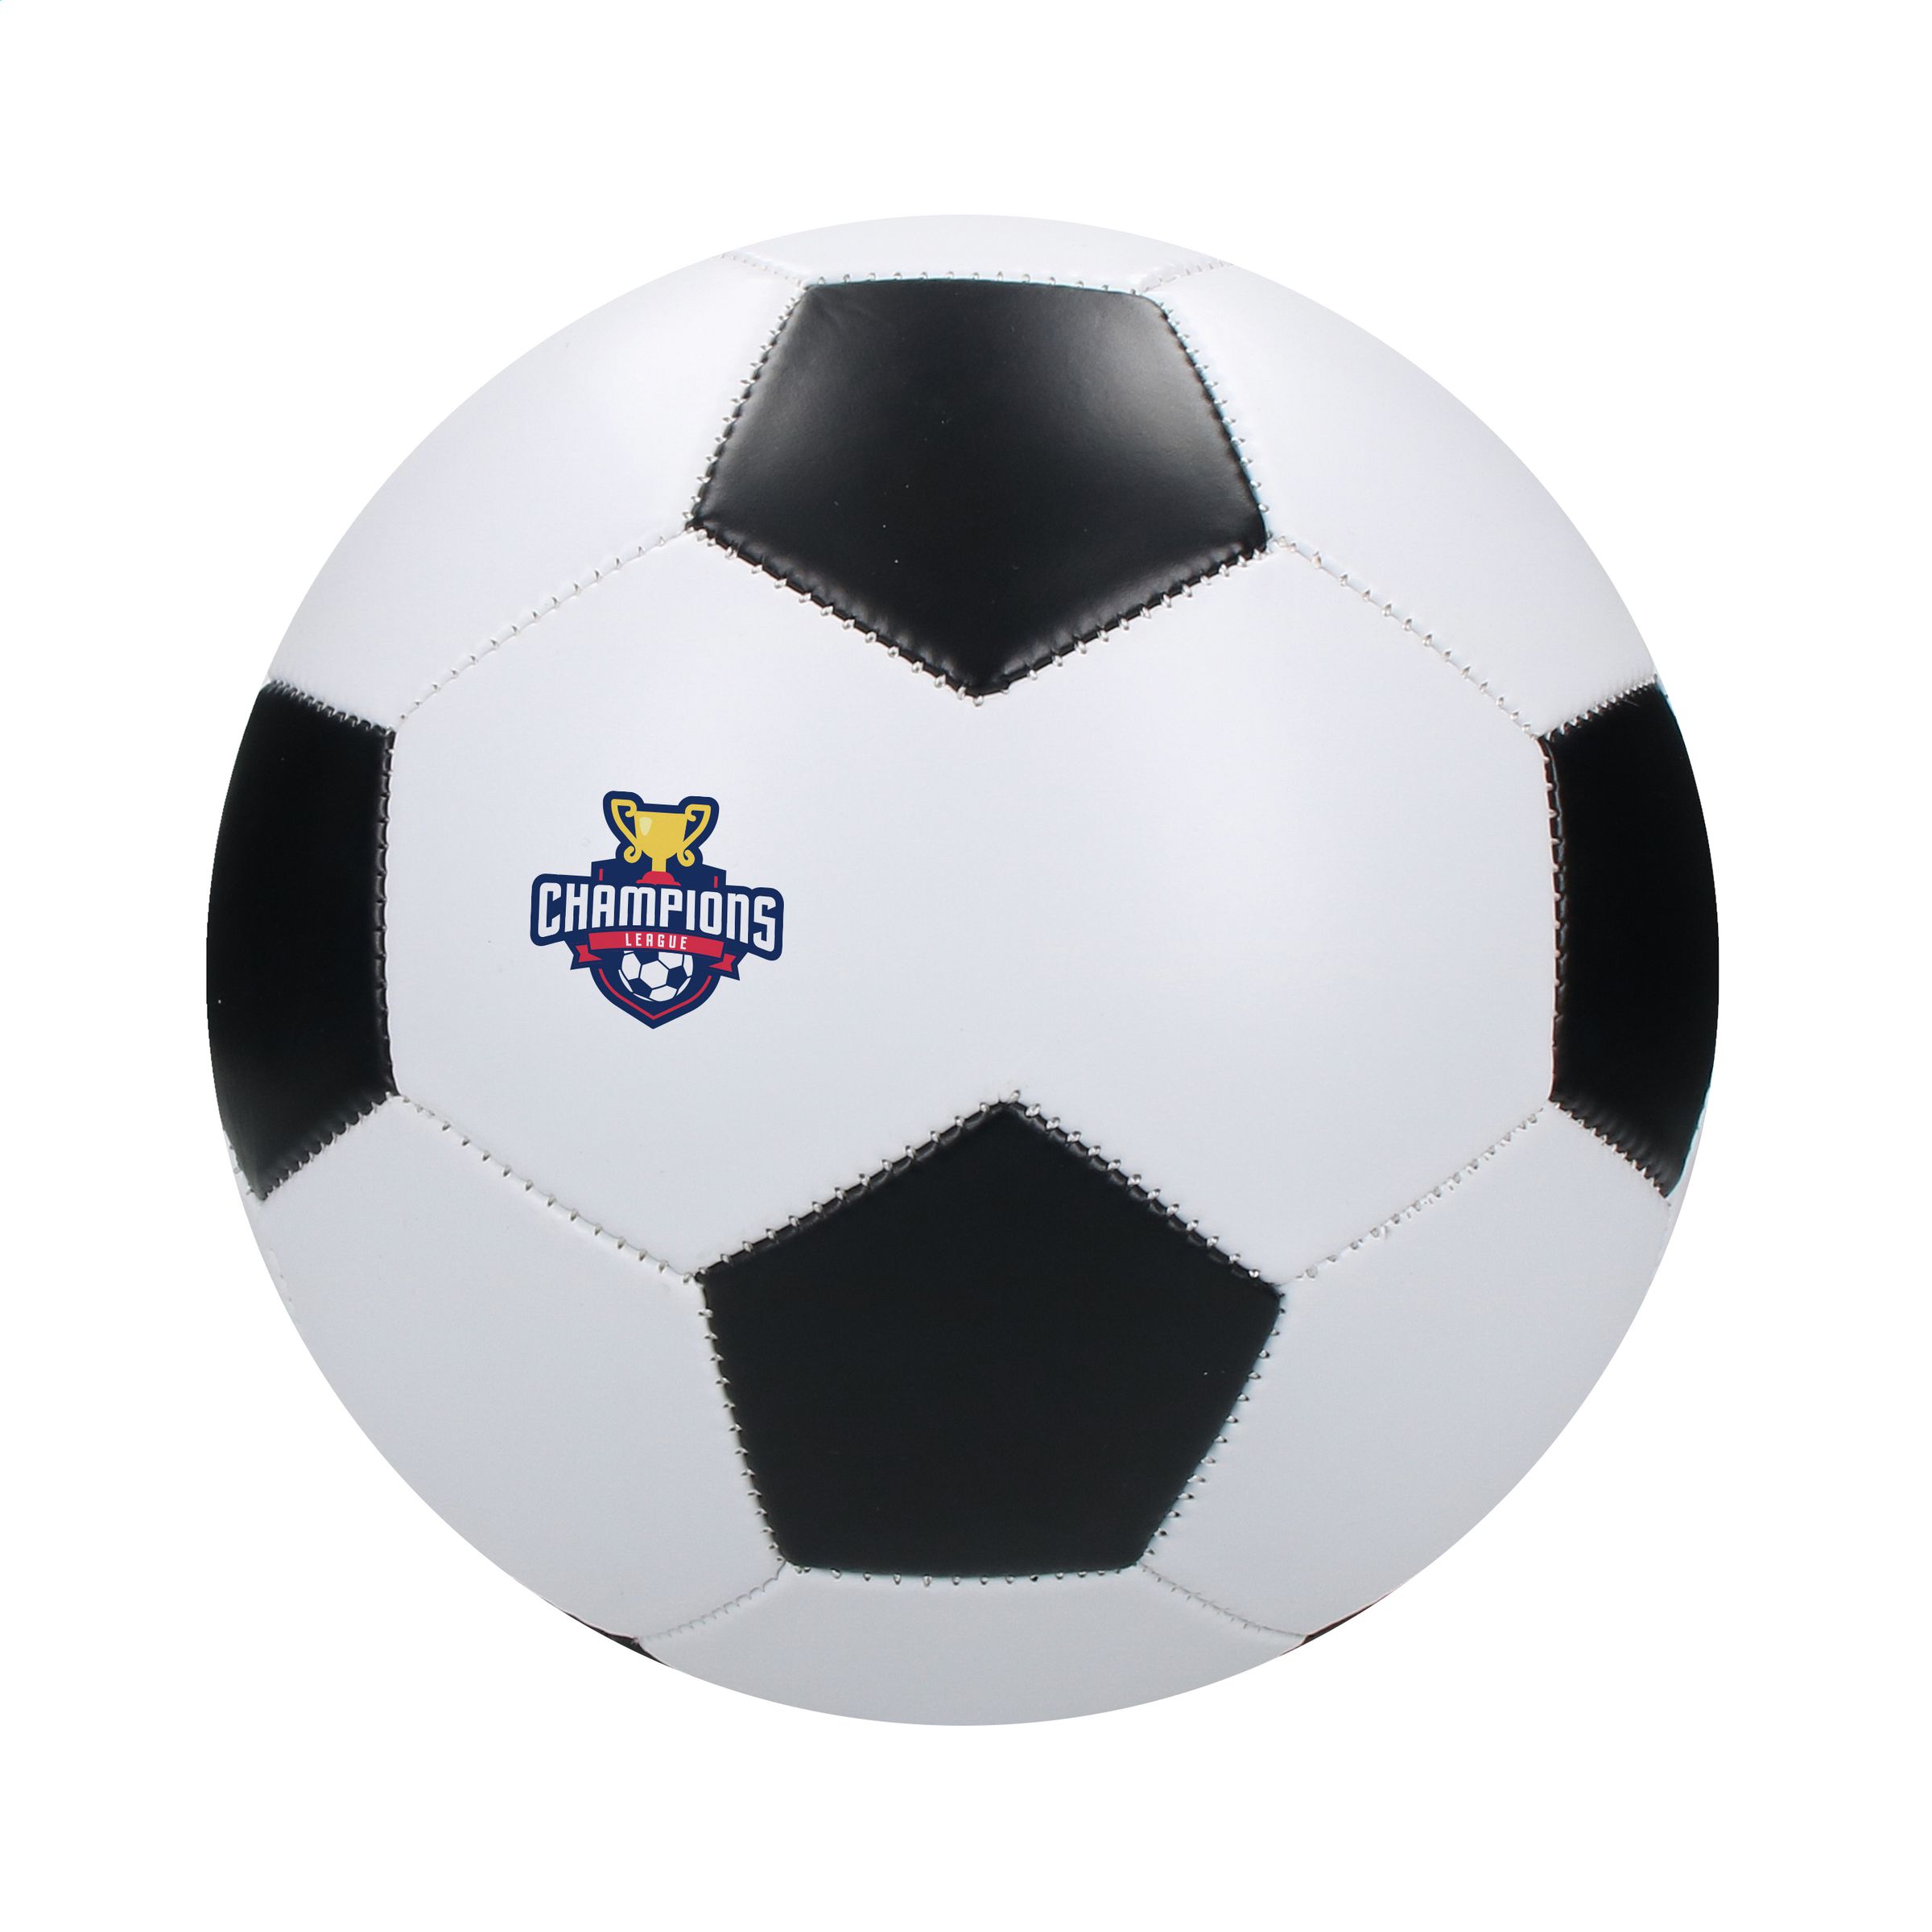 Promotional Retro Design Size 5 Football - St. Catherine's Hill